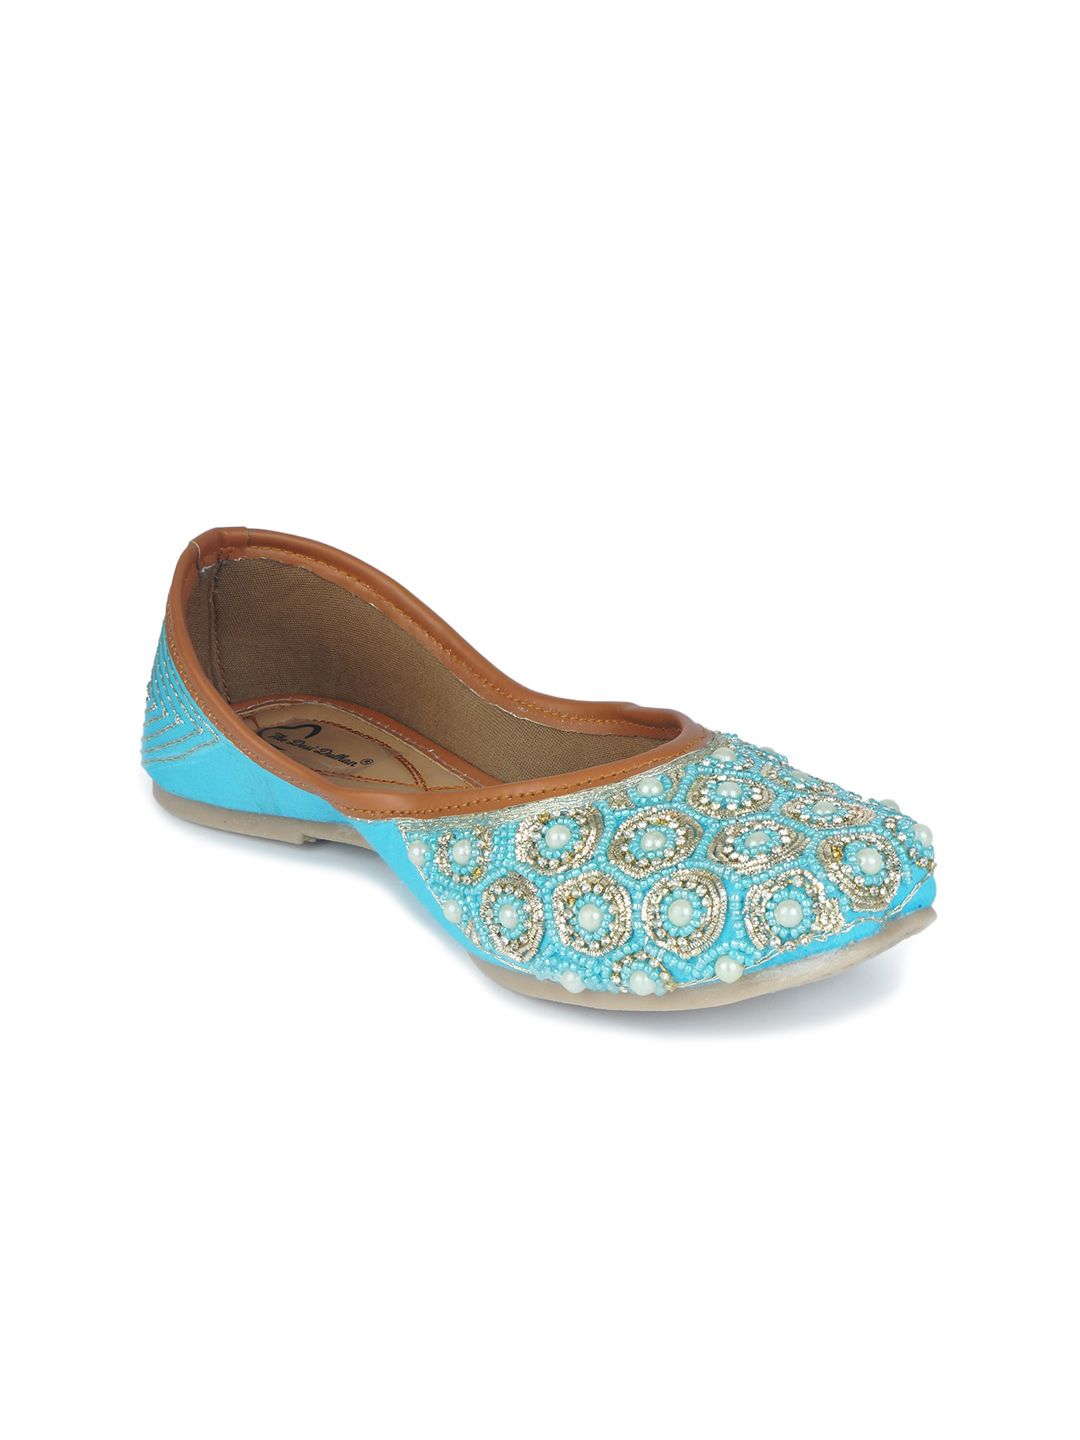 The Desi Dulhan Women Turquoise Blue Printed Leather Ethnic Flats Price in India